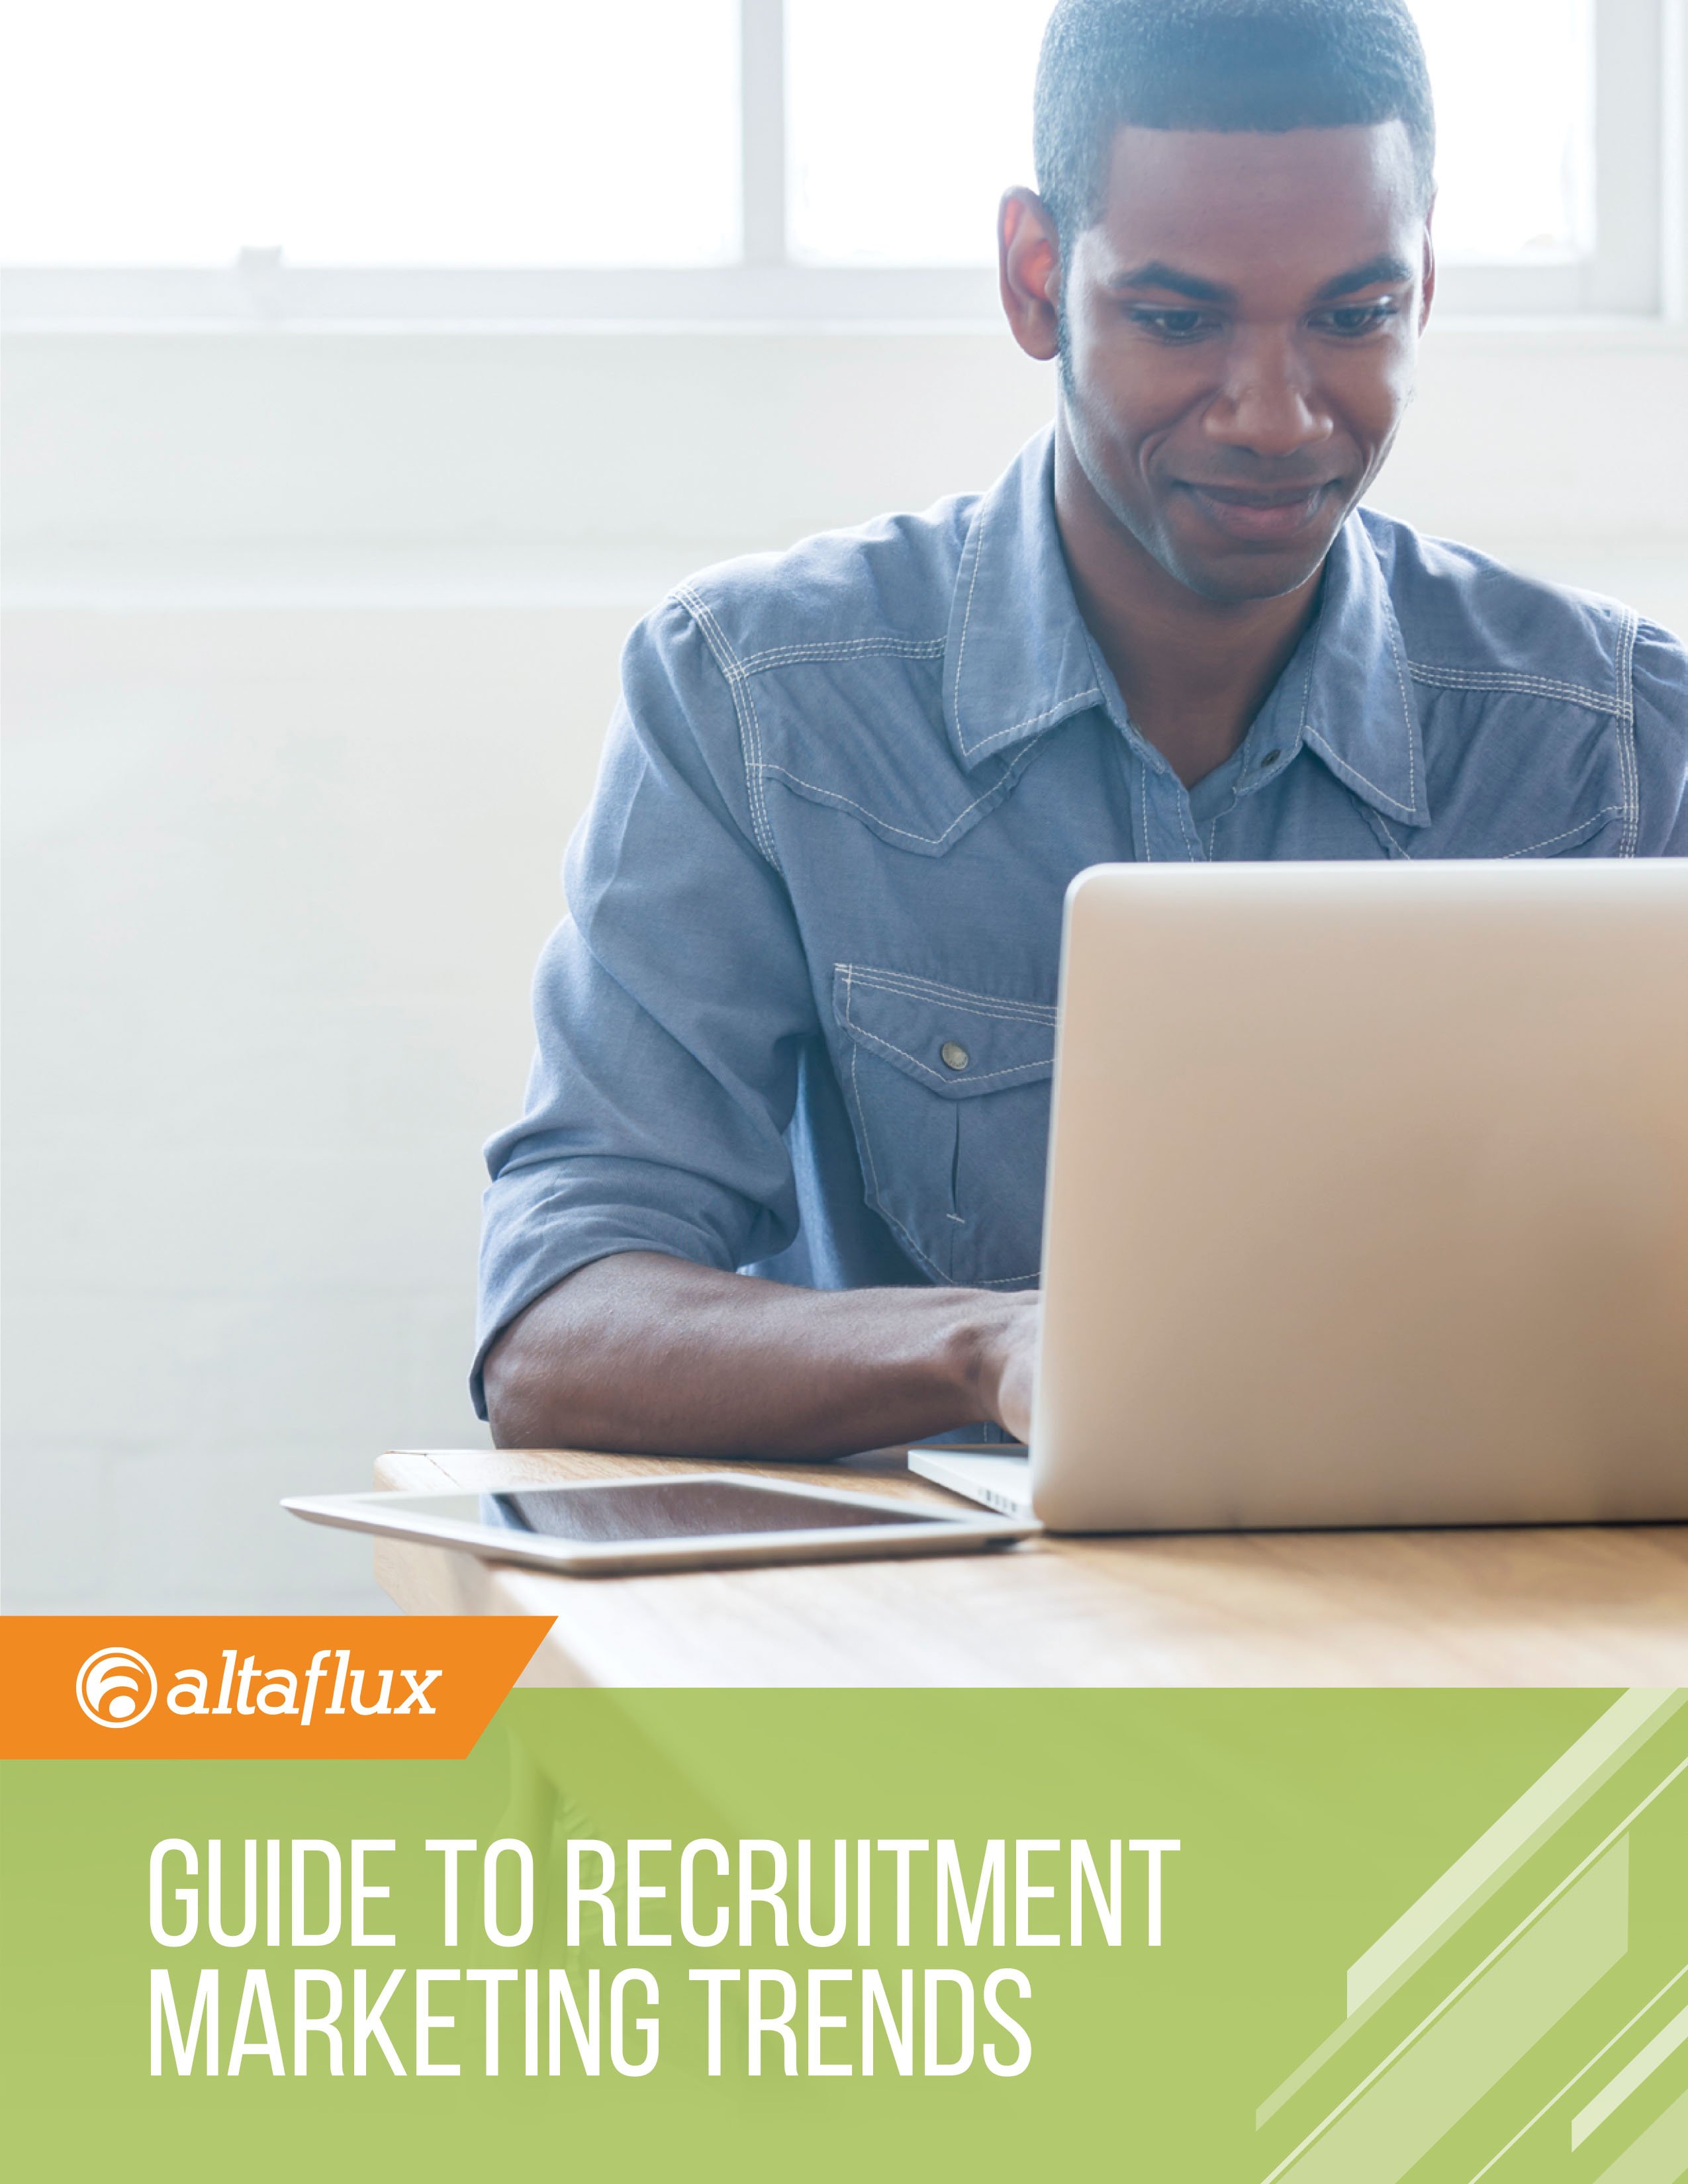 AltaFlux Guide to Recruiting Marketing Trends